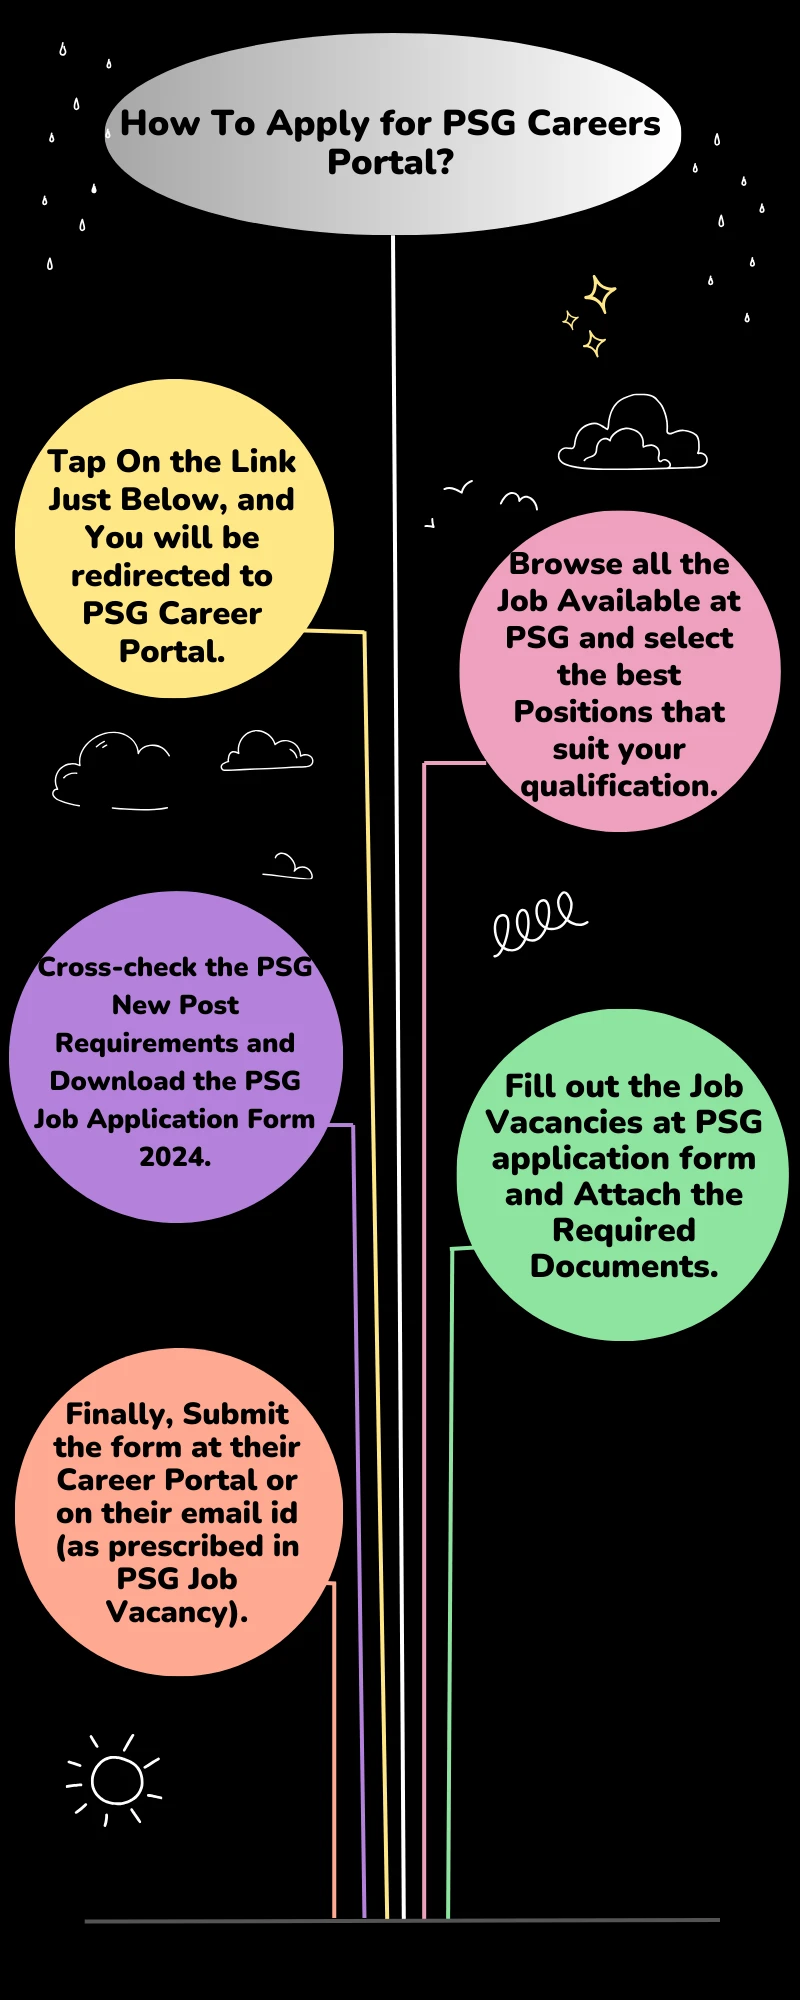 How To Apply for PSG Careers Portal?